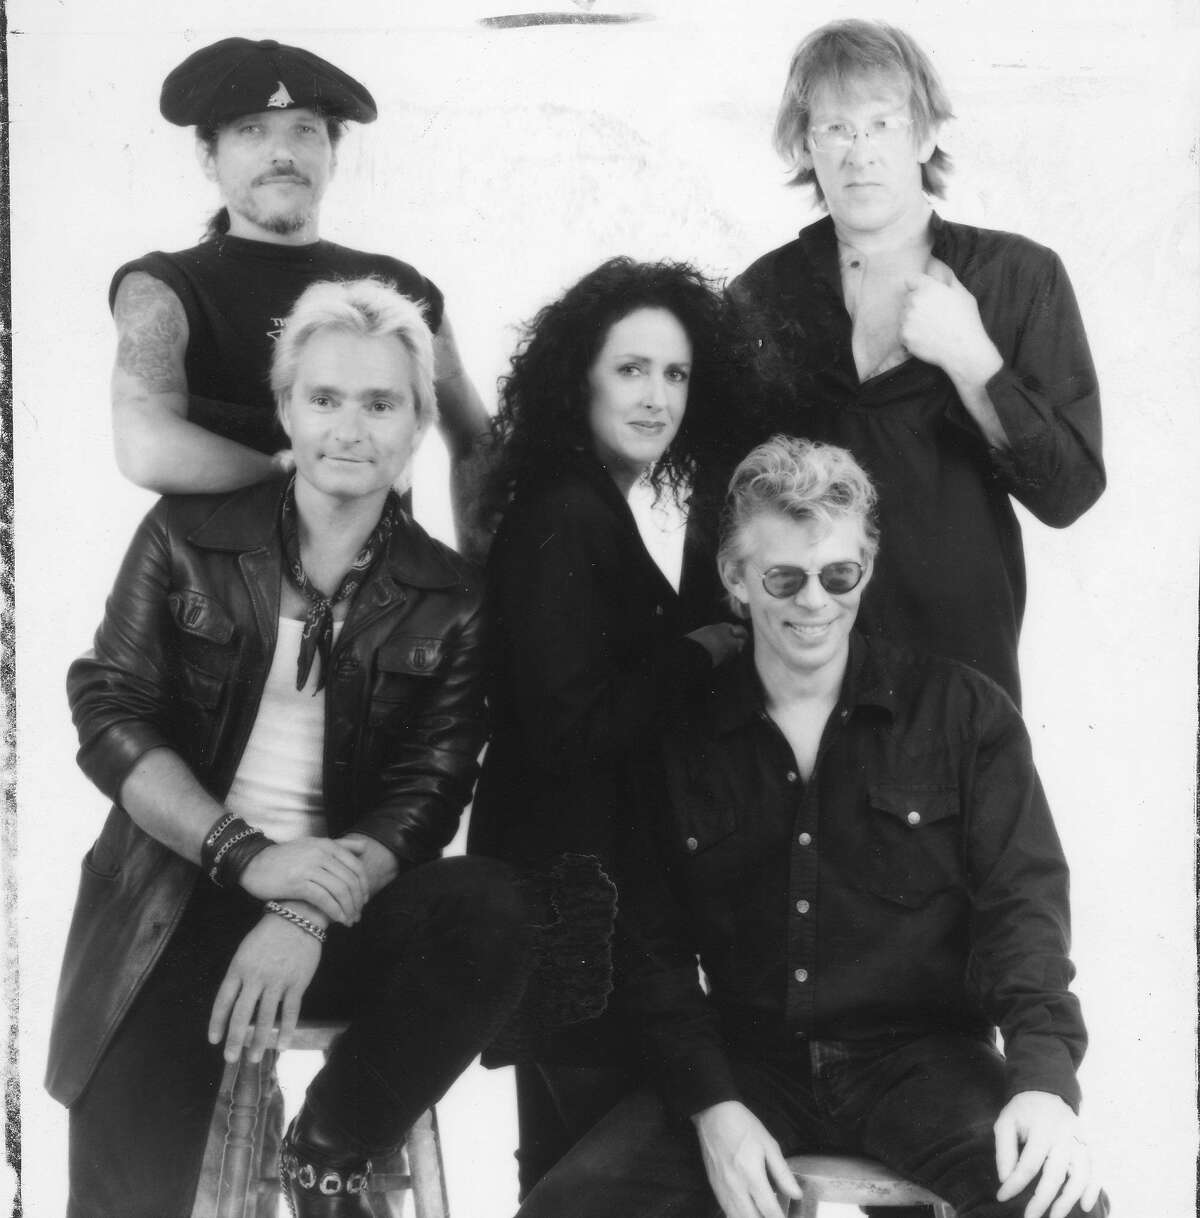 Members of Jefferson Airplane, a popular San Francisco band during the Summer of Love, would put together a reunion tour and album (Left to right) top row: Jorma Kaukonen and Paul Kantner lower row, Marty Balin, Grace Slick and Jack Casady Handout photo ran 09/17/1989, Sunday Datebook, p. 53